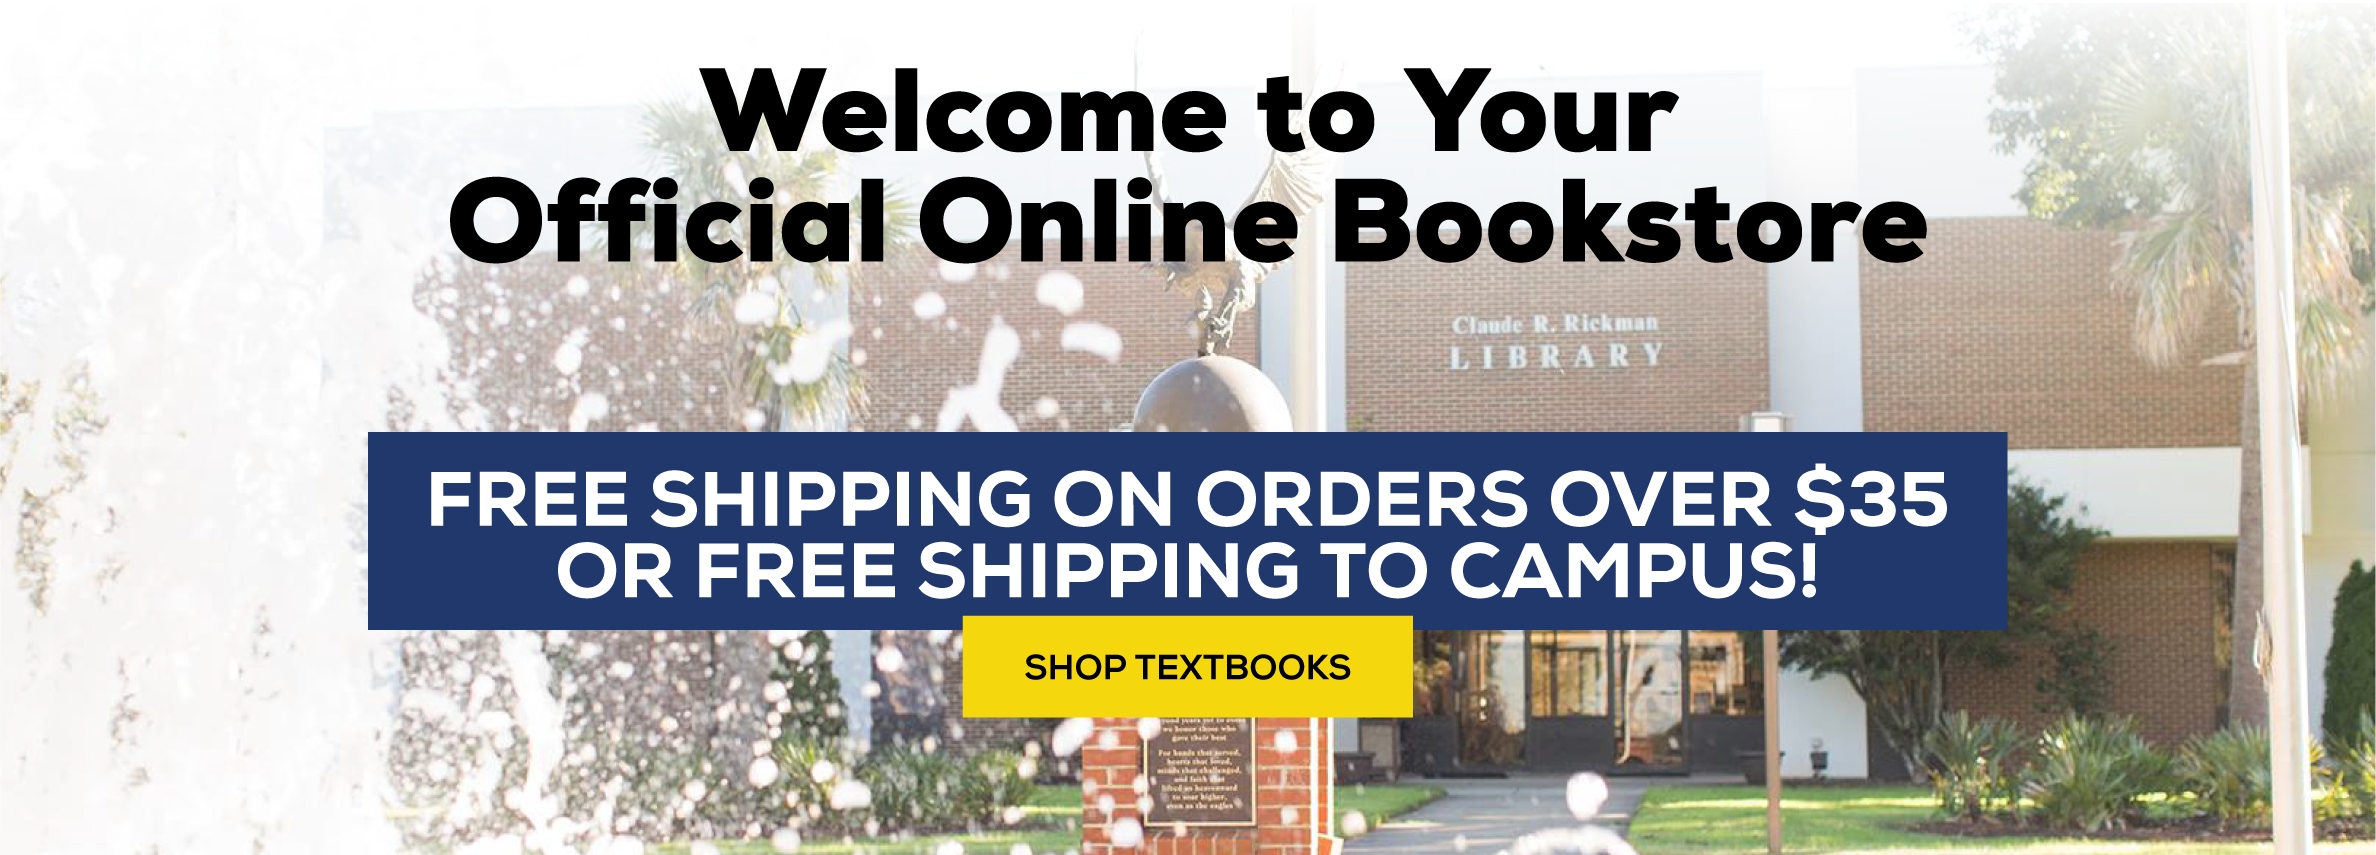 Welcome to your official online bookstore. Free shipping on all orders over $35 or free shipping to campus! Shop textbooks.